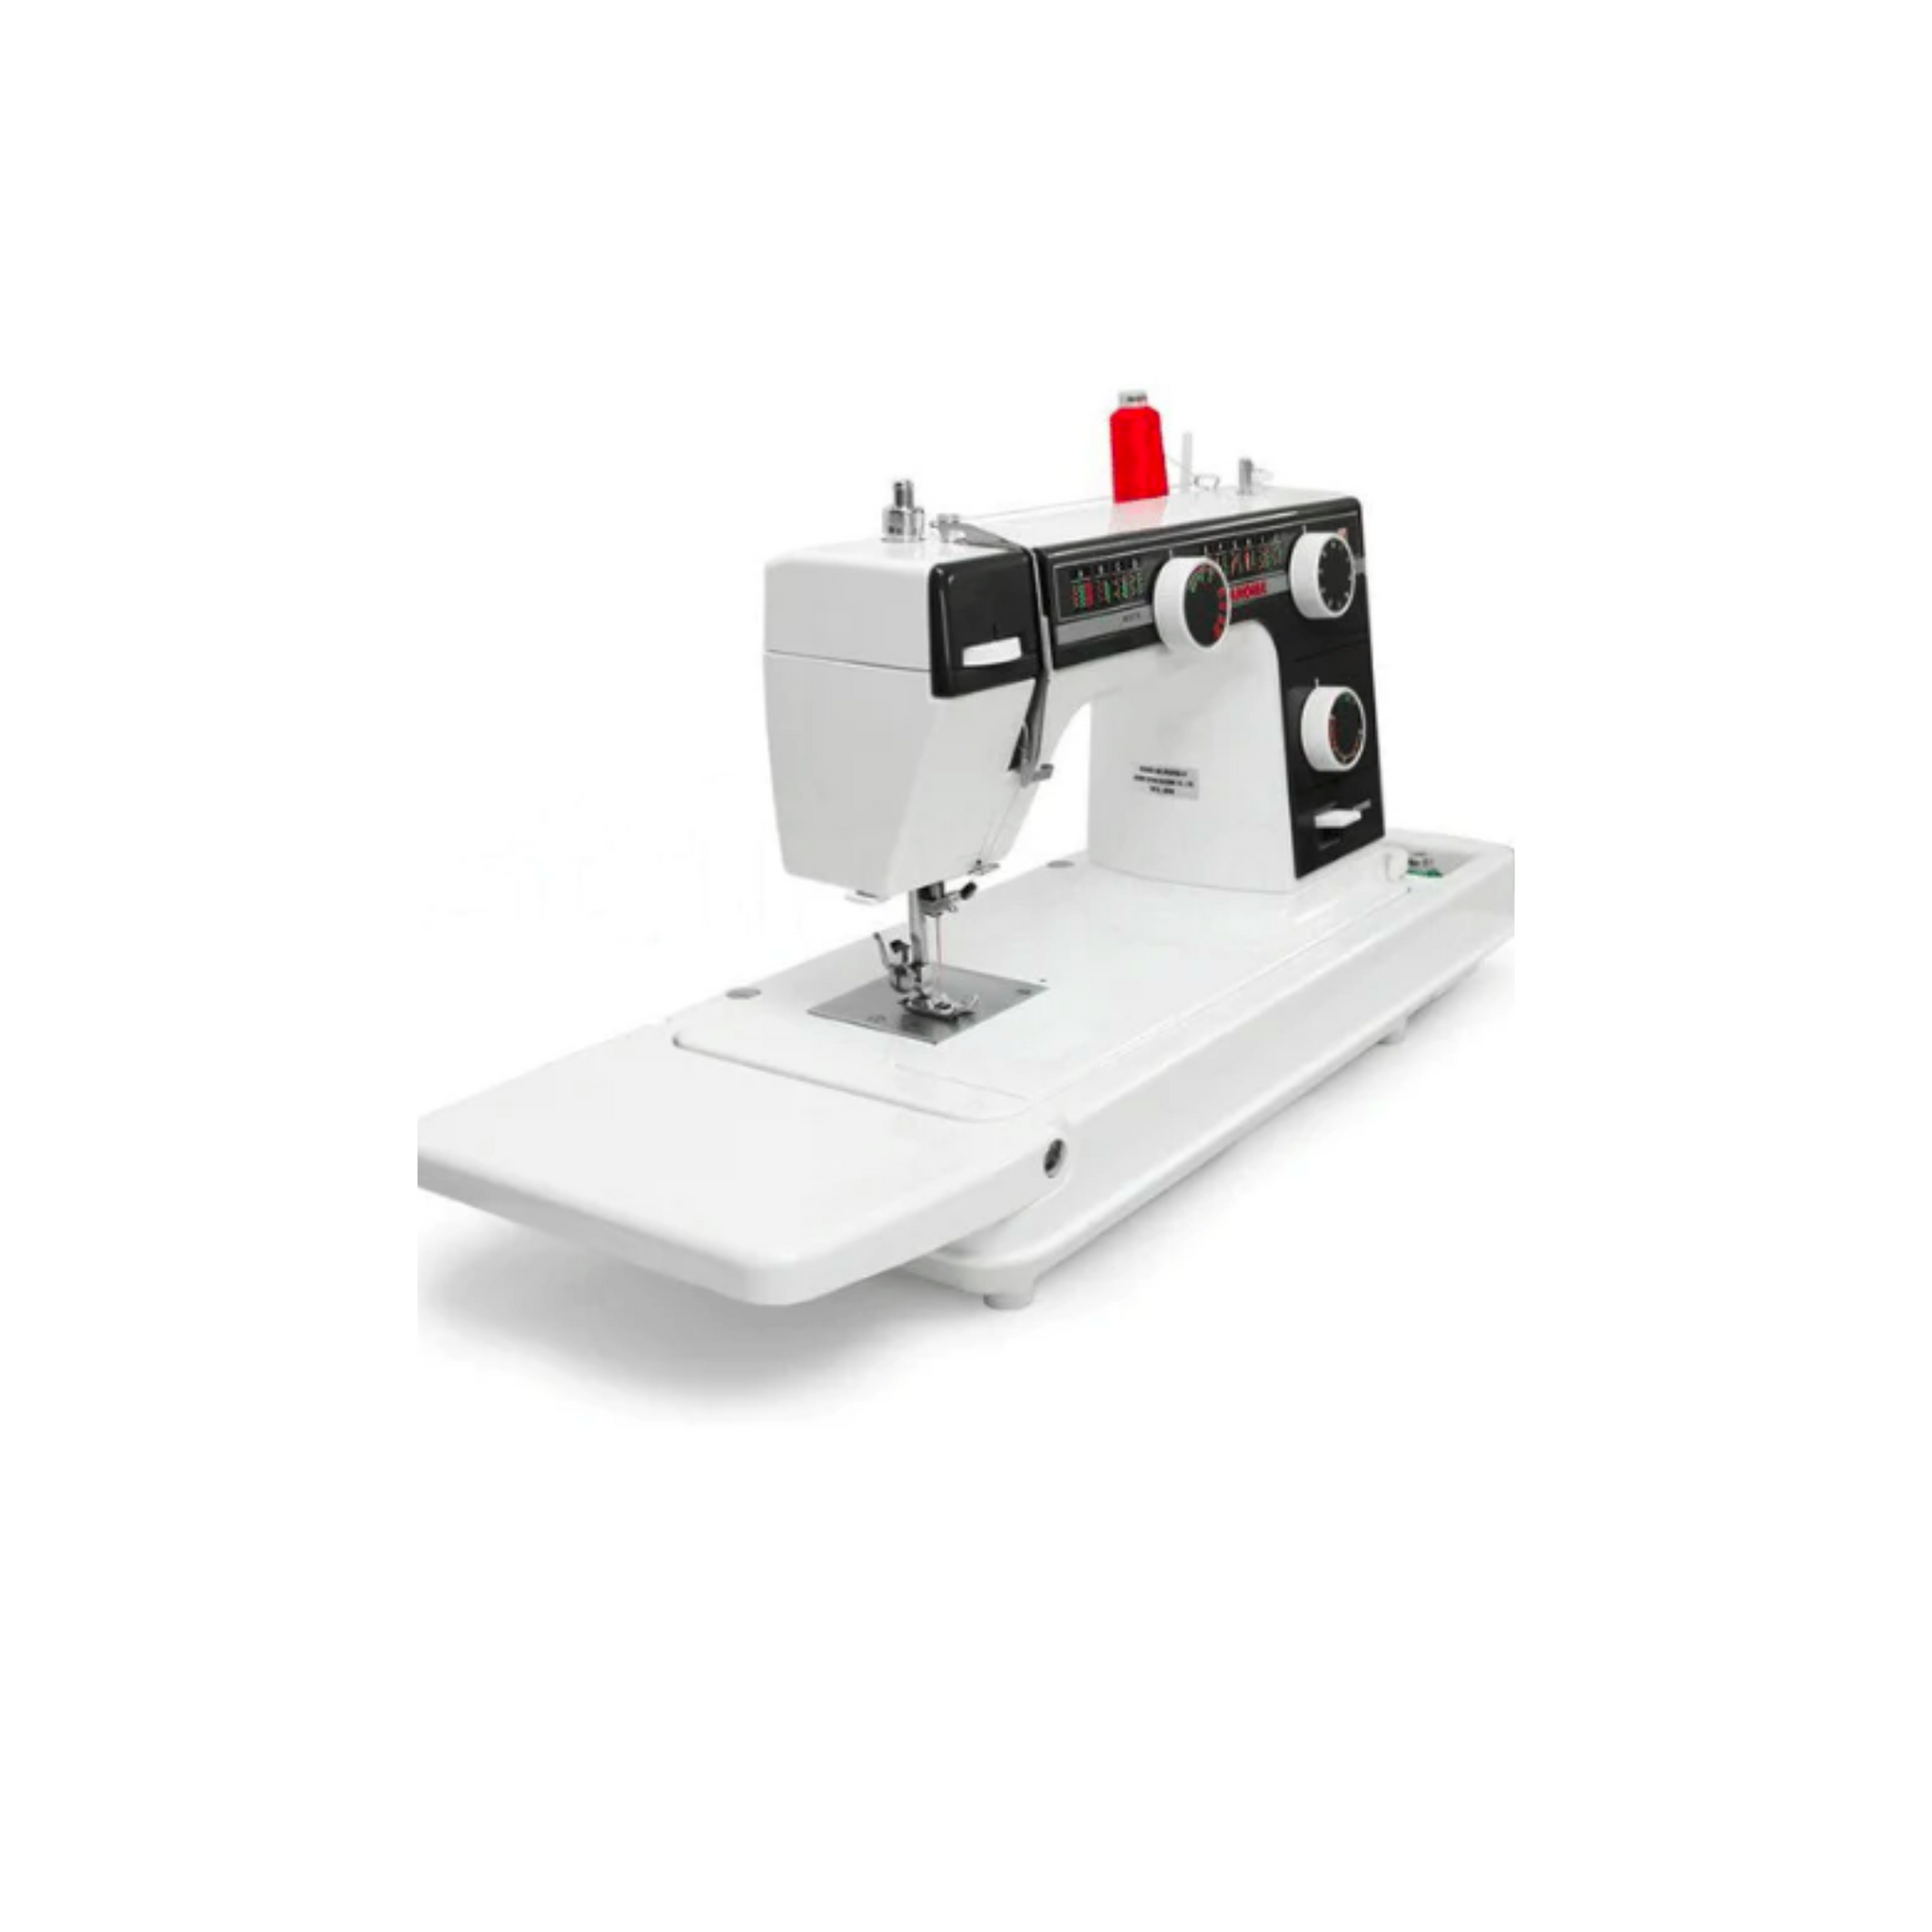 Janome 393PD - Sewing machine - Black - White - Side view